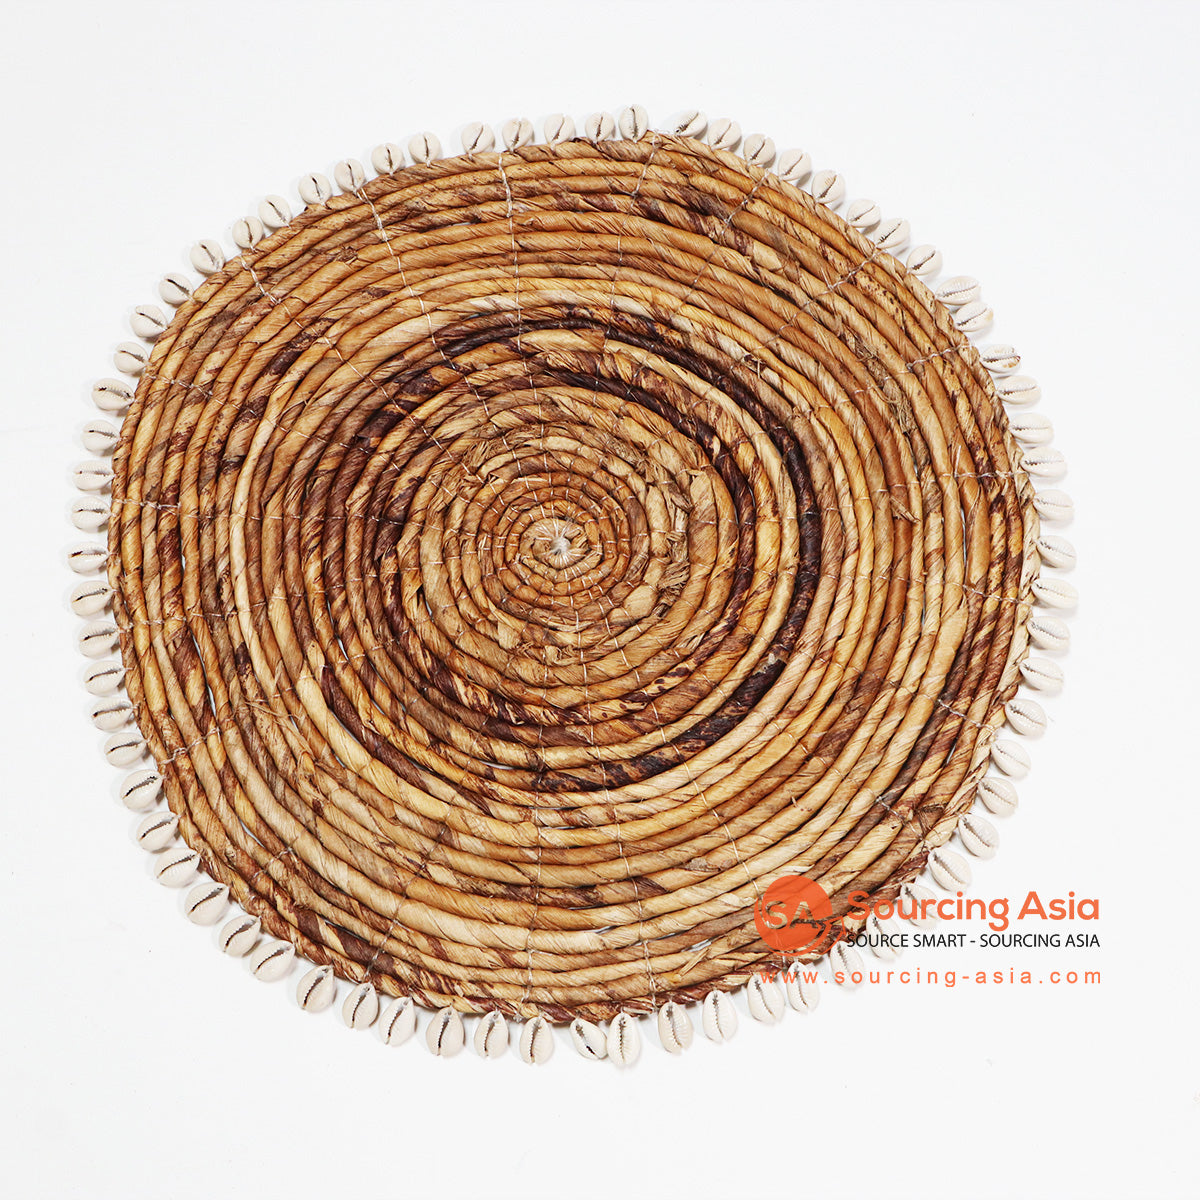 HBSC021 NATURAL WOVEN BANANA FIBER ROUND PLACEMAT WITH SHELL